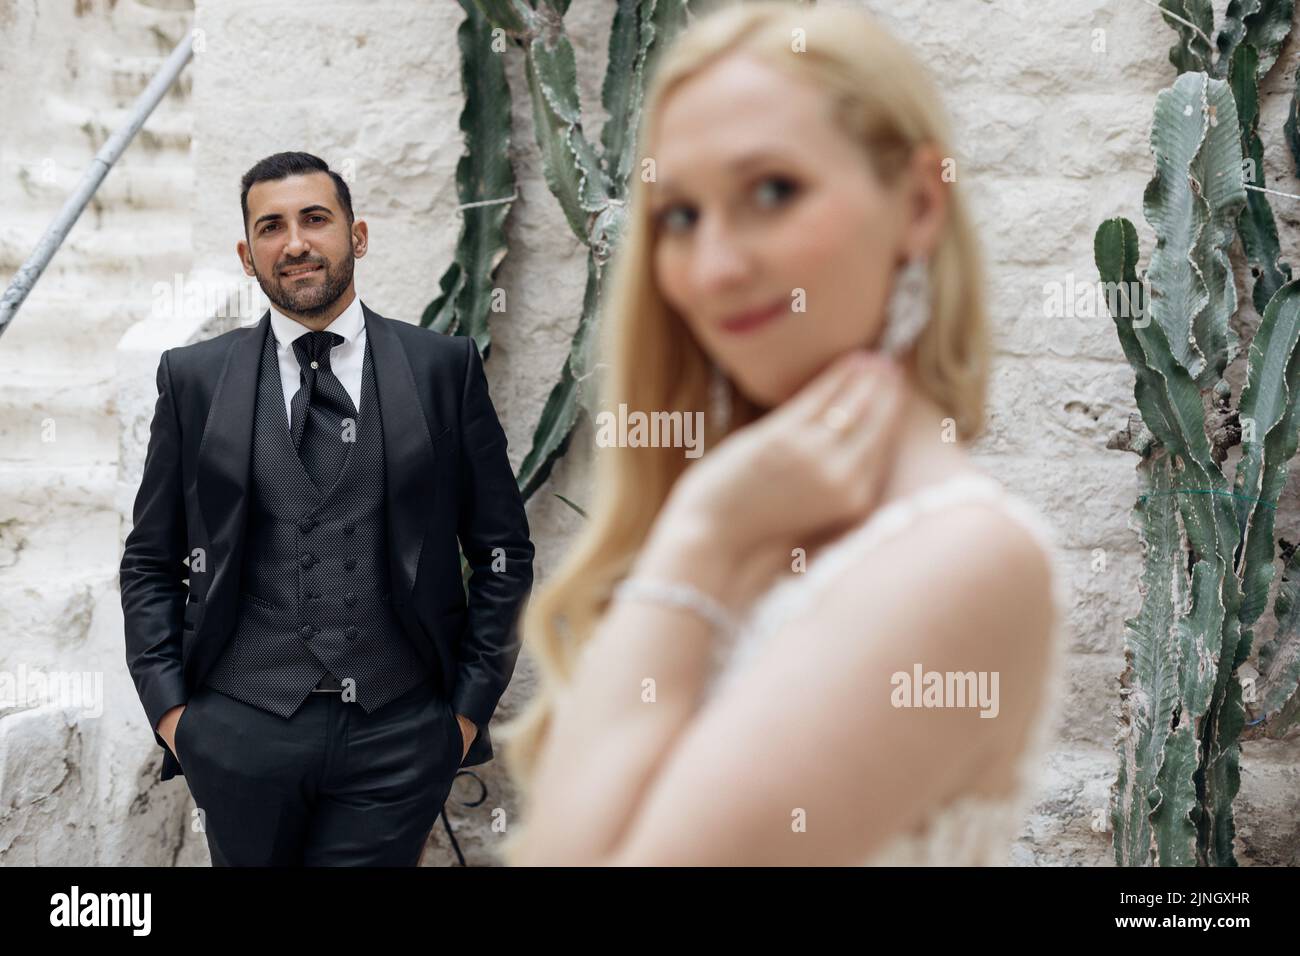 Portrait of wedding couple standing near white brick wall. Groom in suit admiring bride, jamming hands into pockets.  Stock Photo